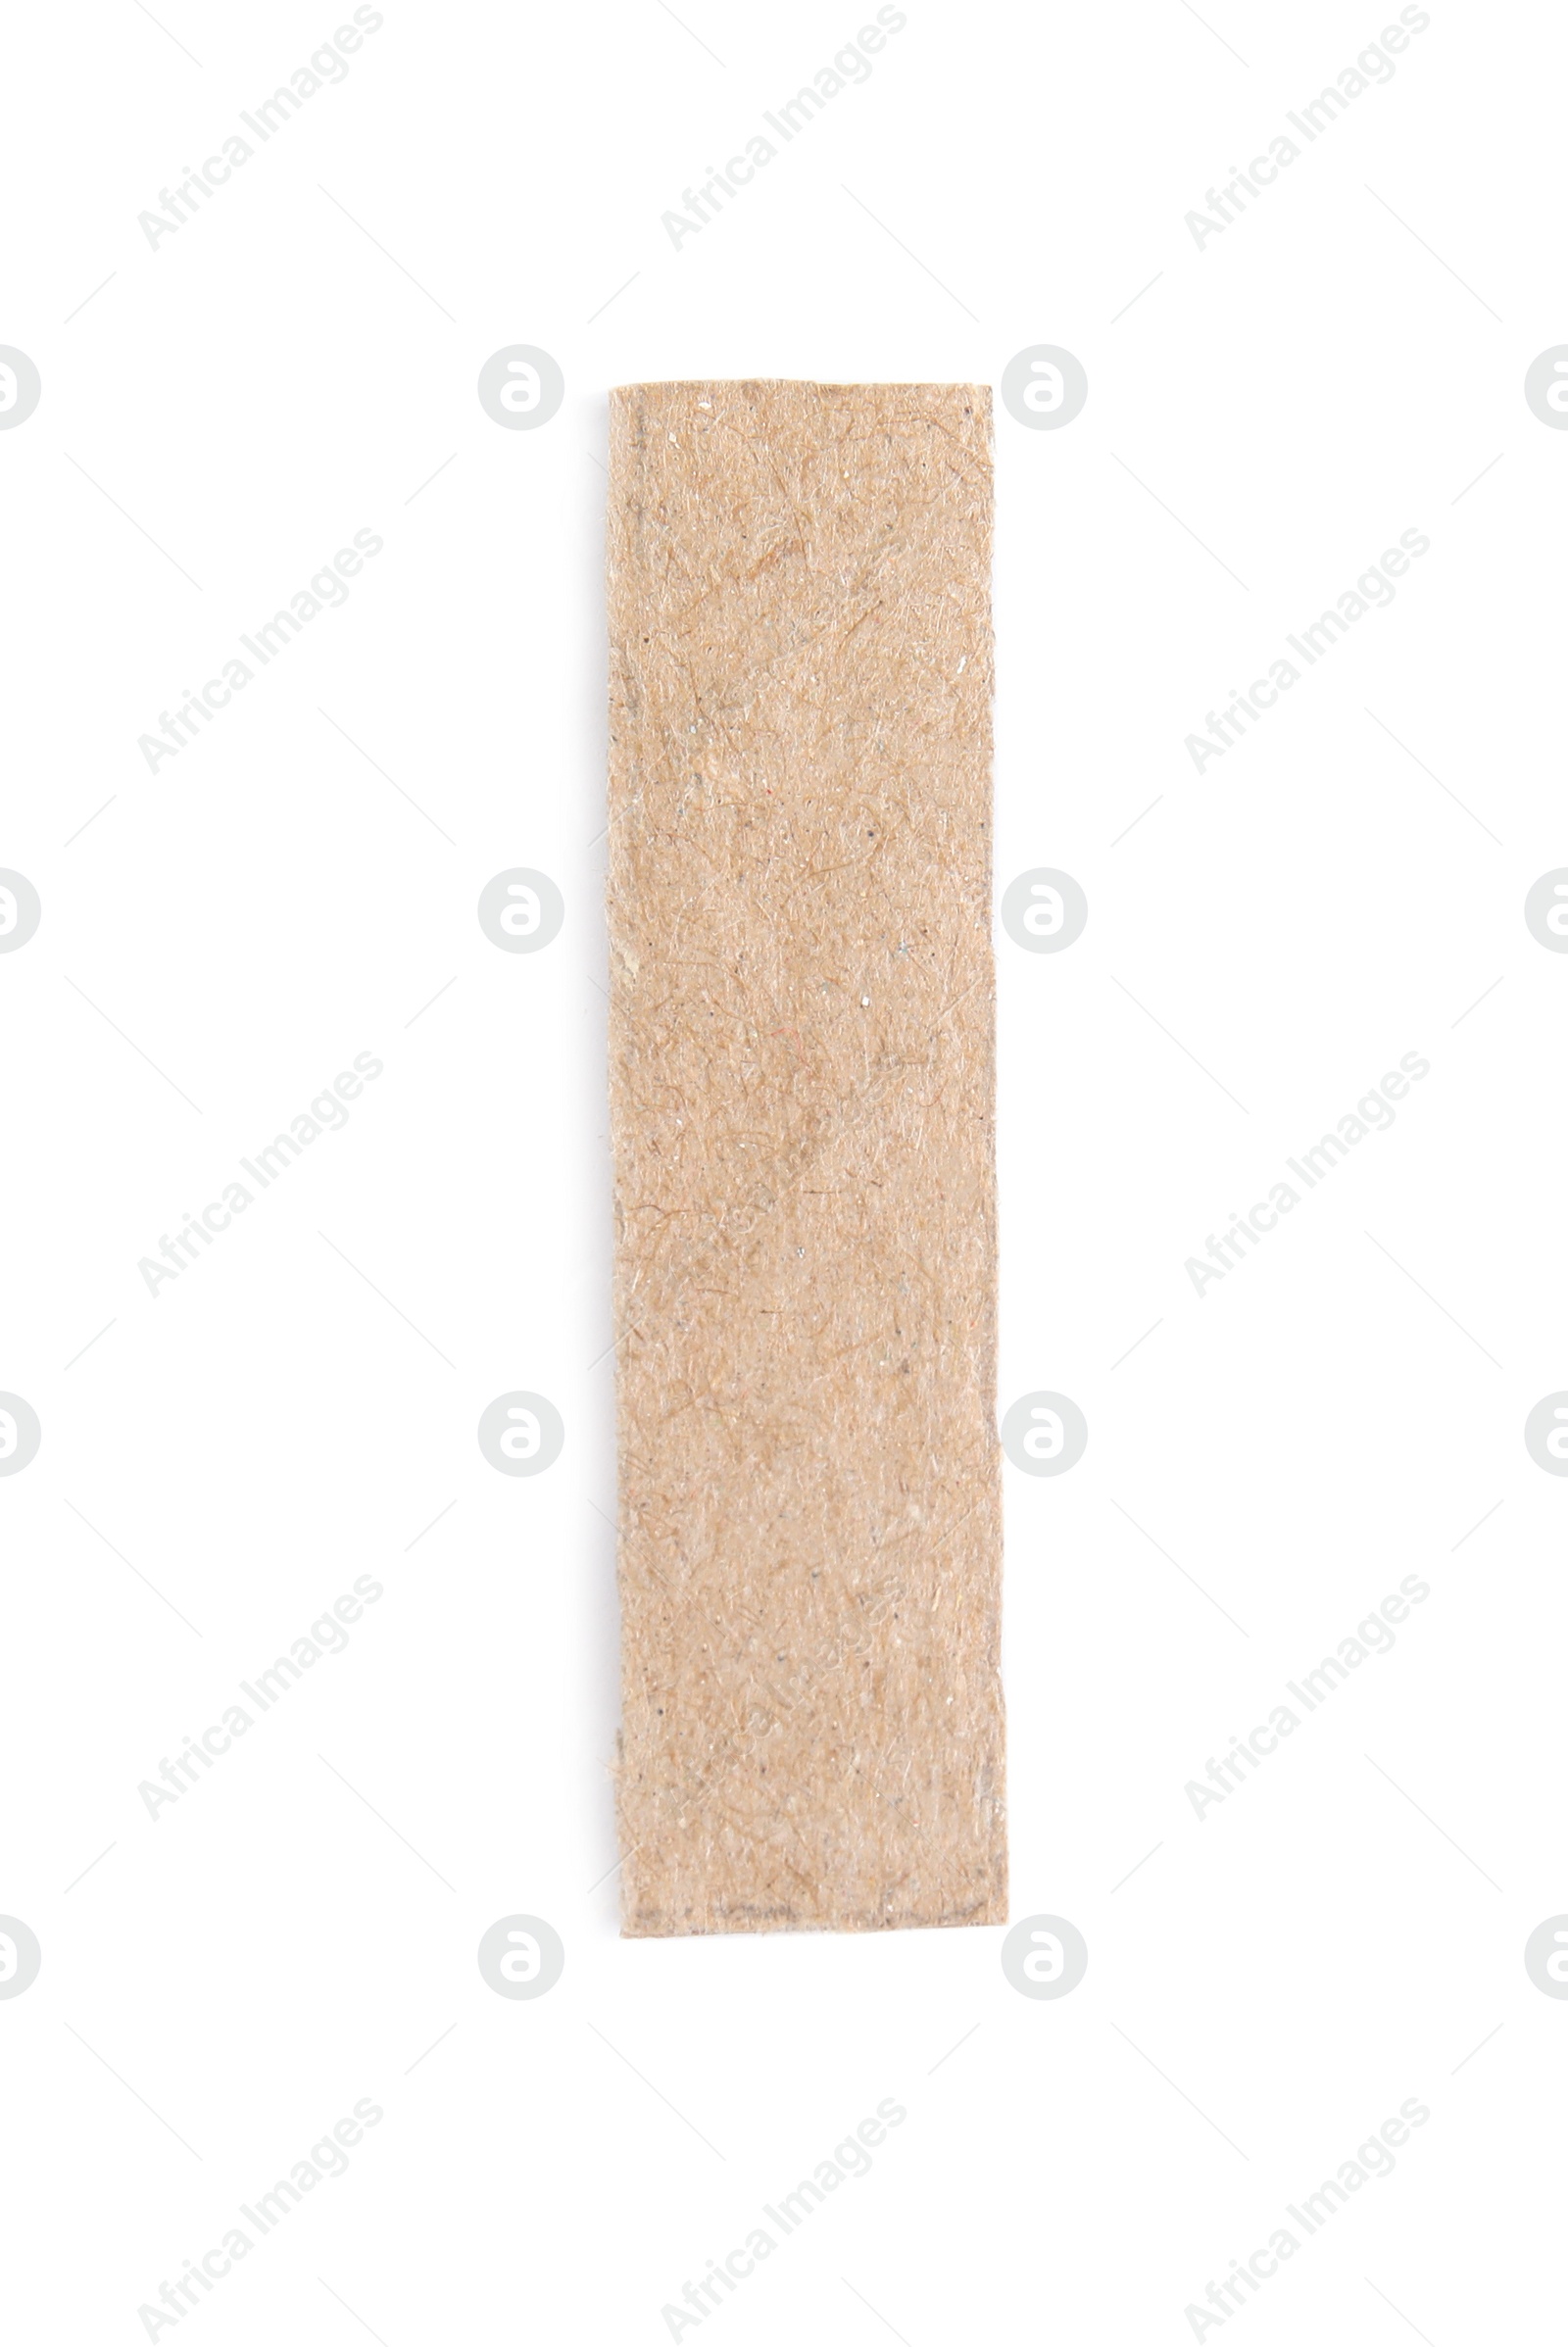 Photo of Letter I made of cardboard isolated on white